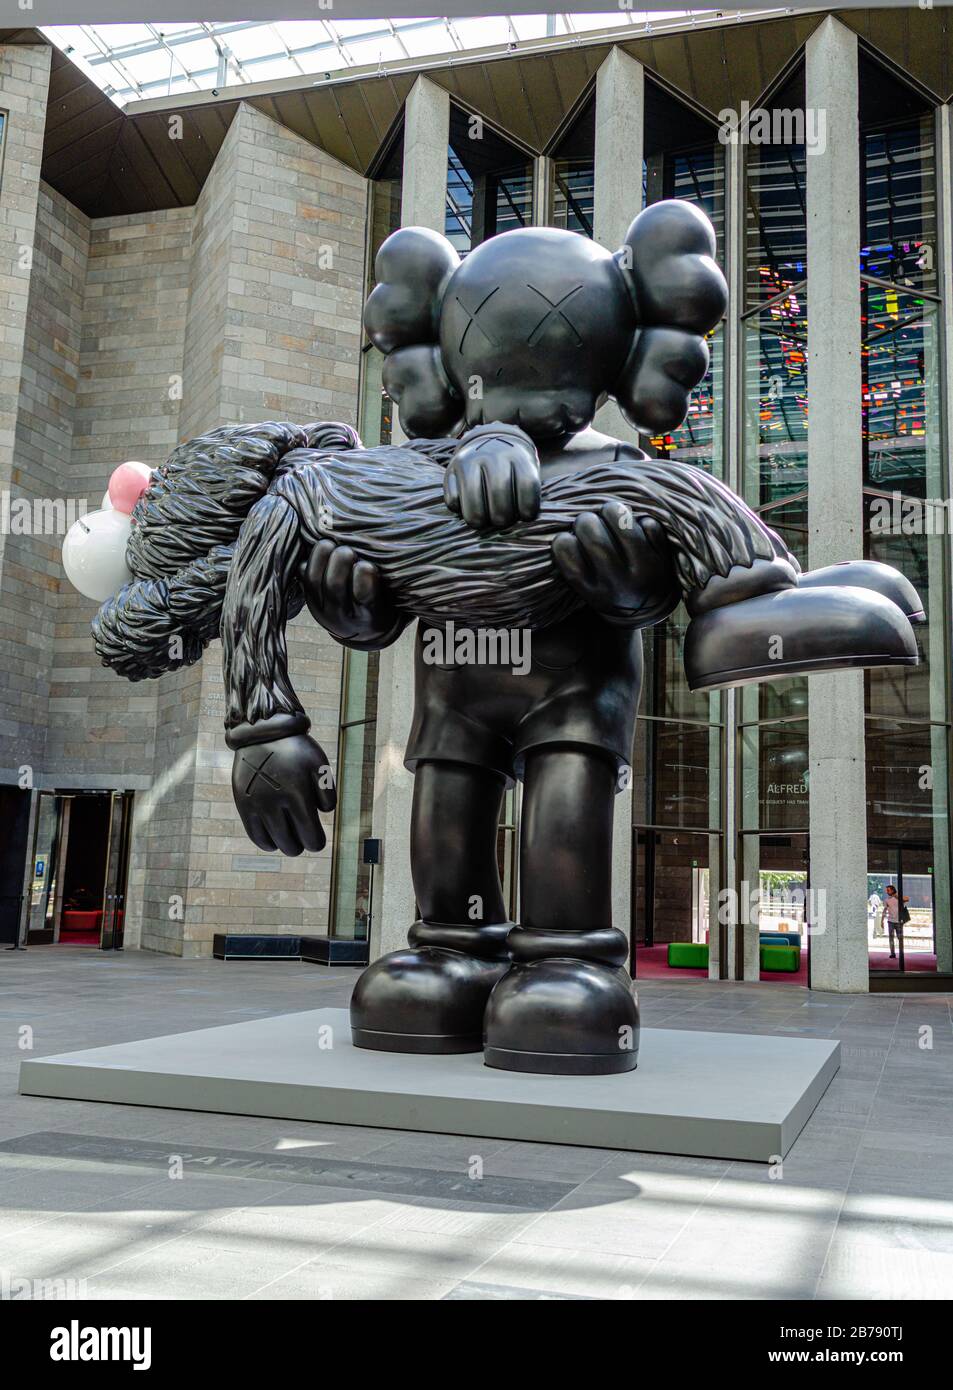 GONE, 2019. KAWS companionship in the age of loneliness exhibition large sculpture at National Gallery of Victoria Stock Photo